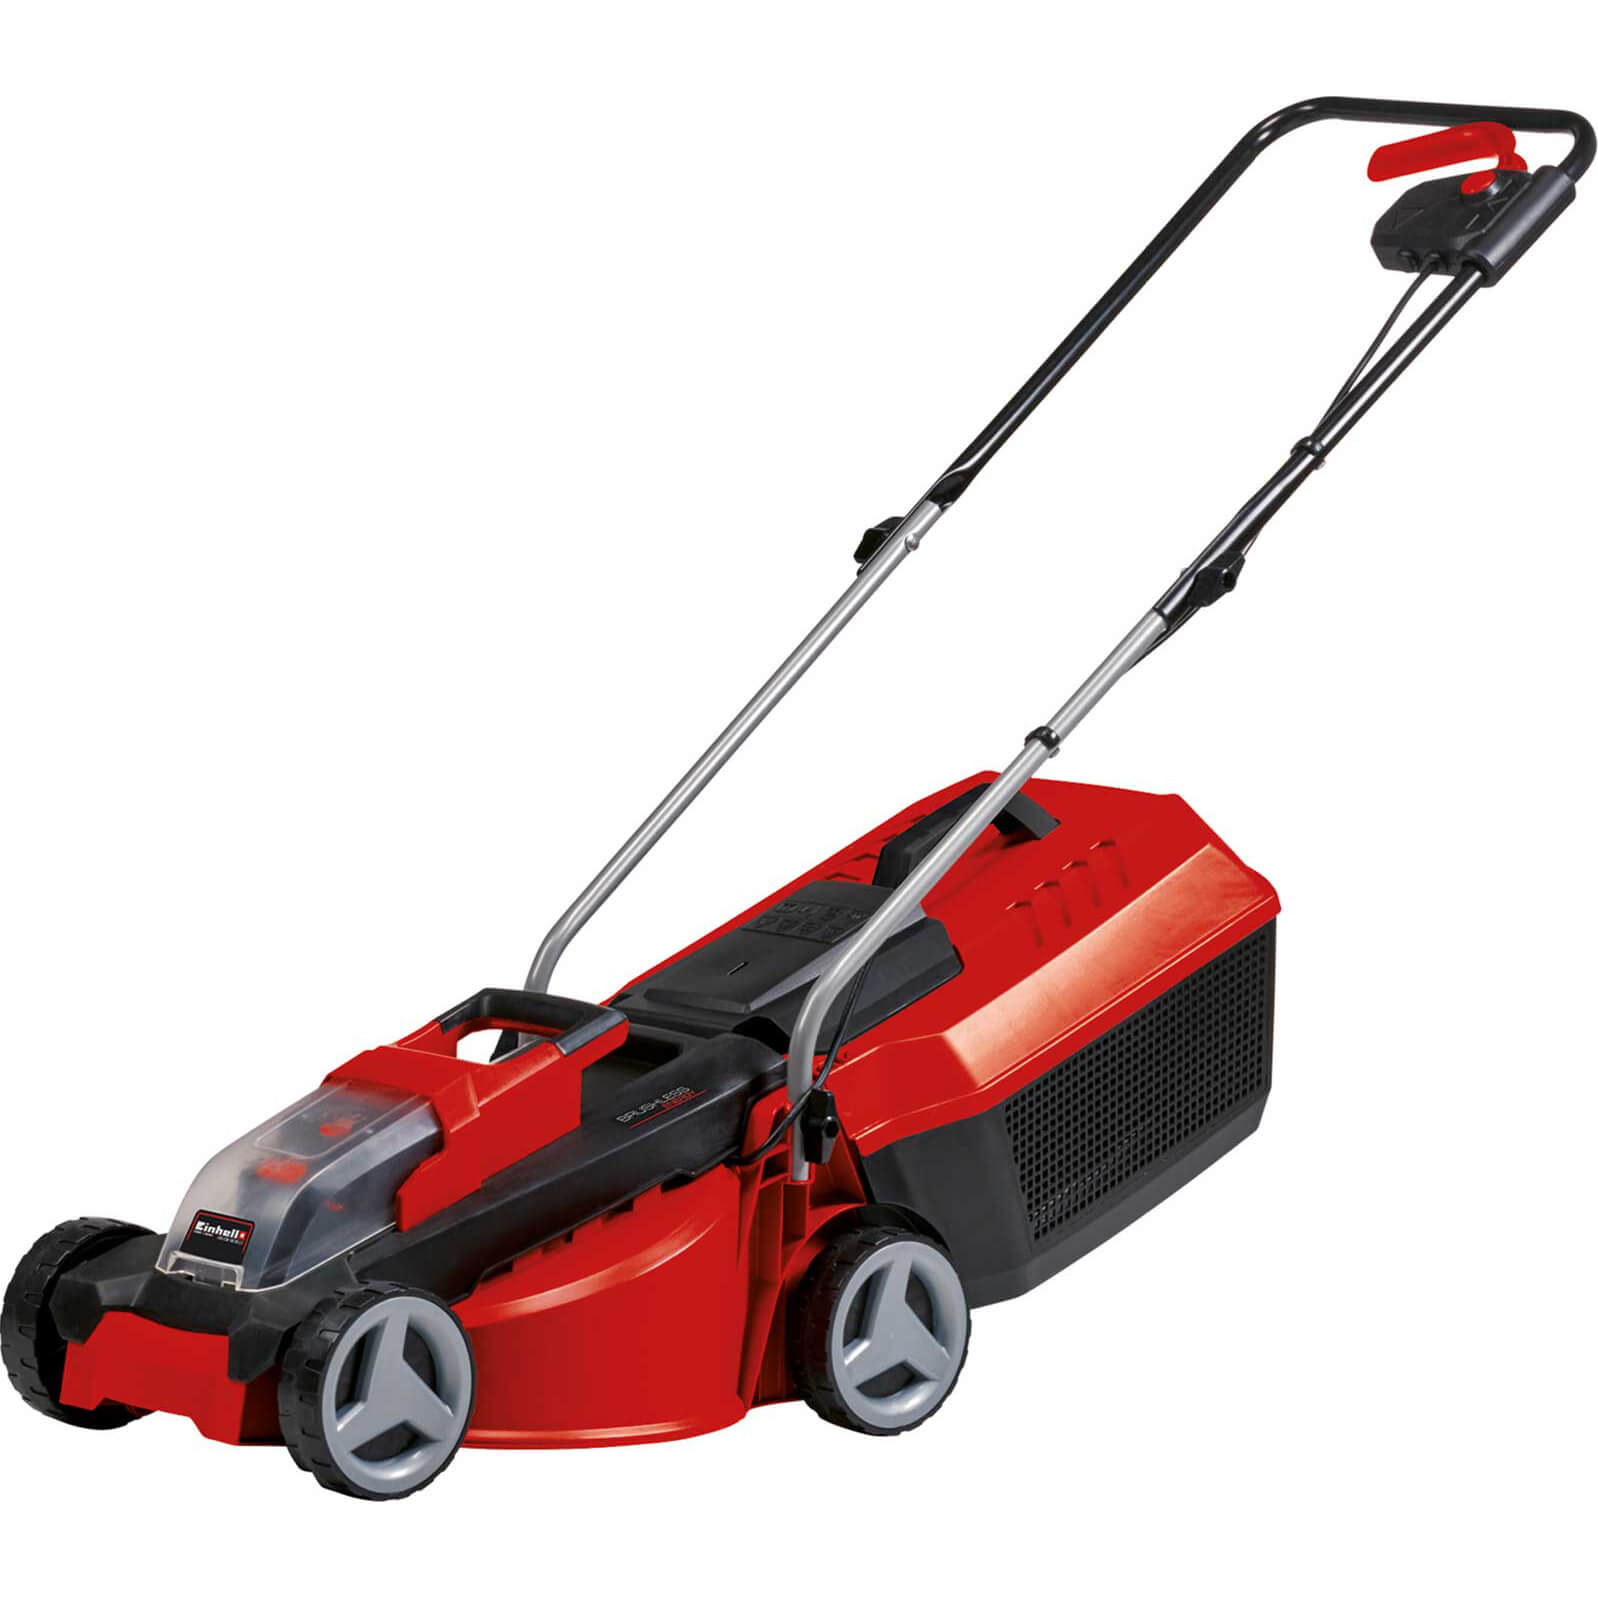 Image of Einhell GE-CM 18/30 Li 18v Cordless Brushless Lawnmower 300mm No Batteries No Charger